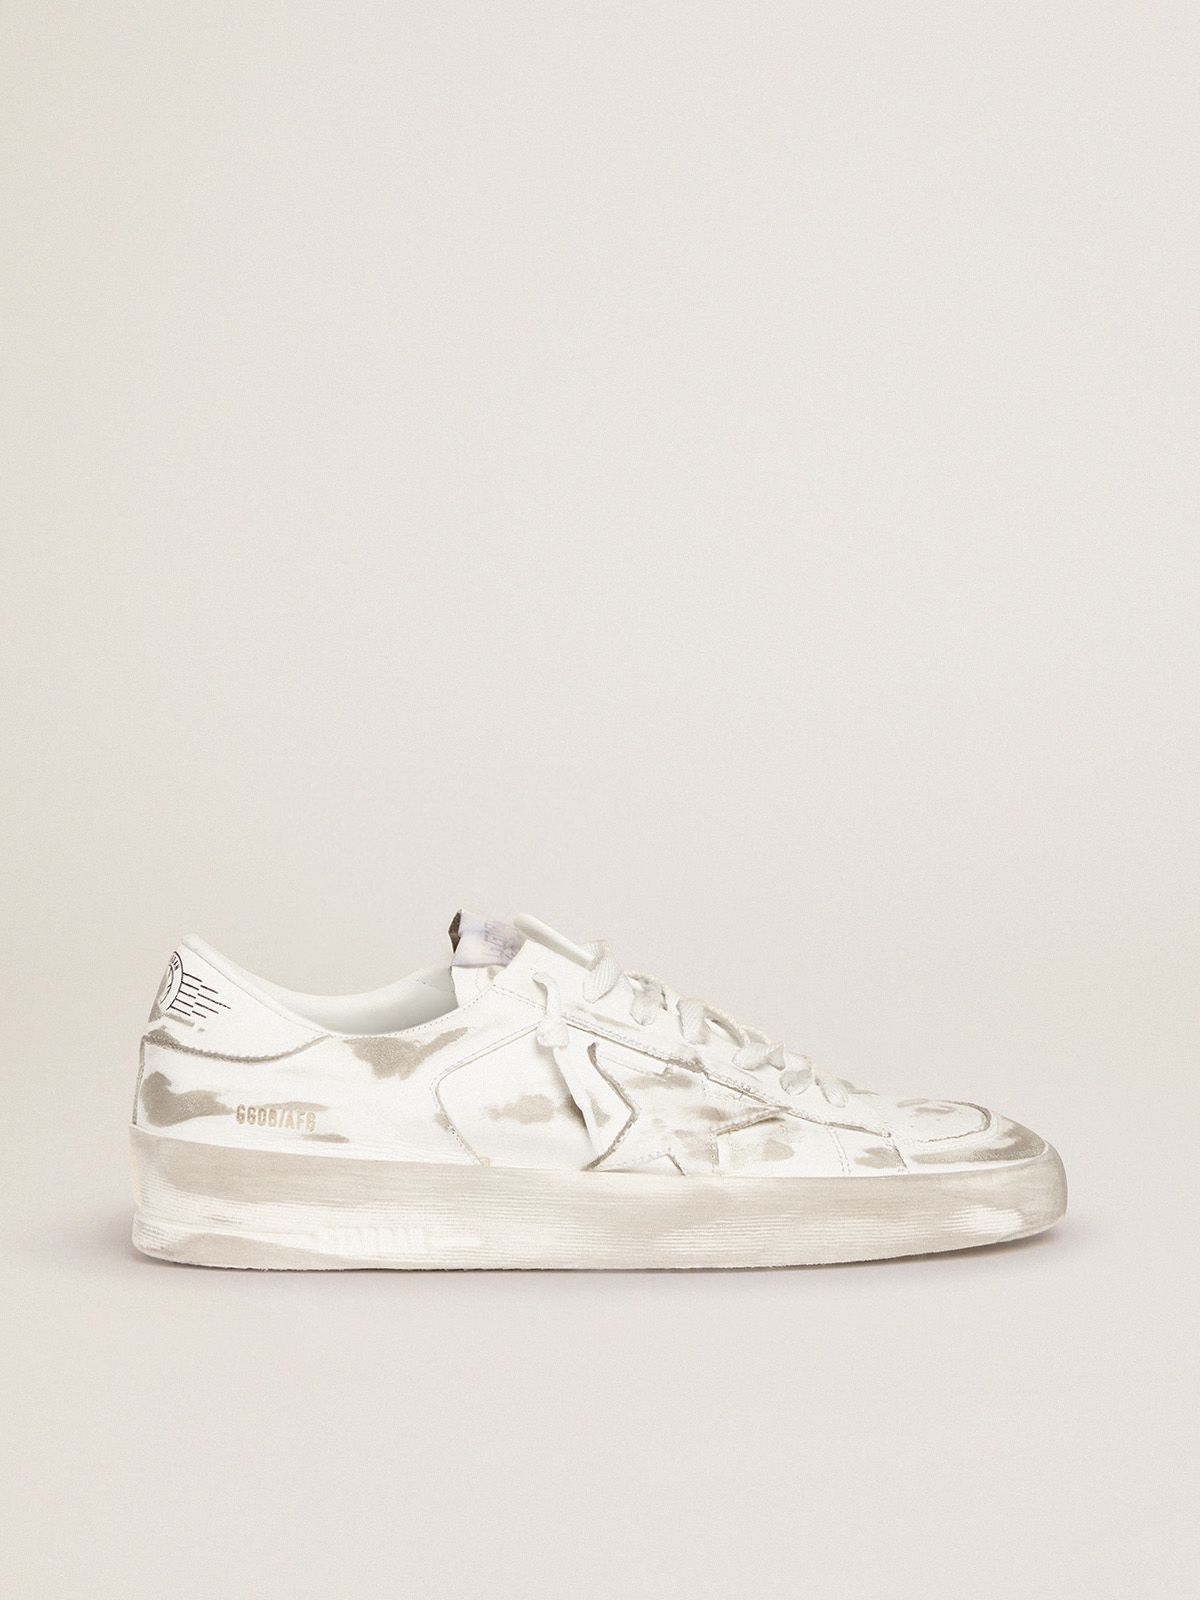 Golden Goose Saldi Uomo Stardan sneakers in white leather with lived-in treatment